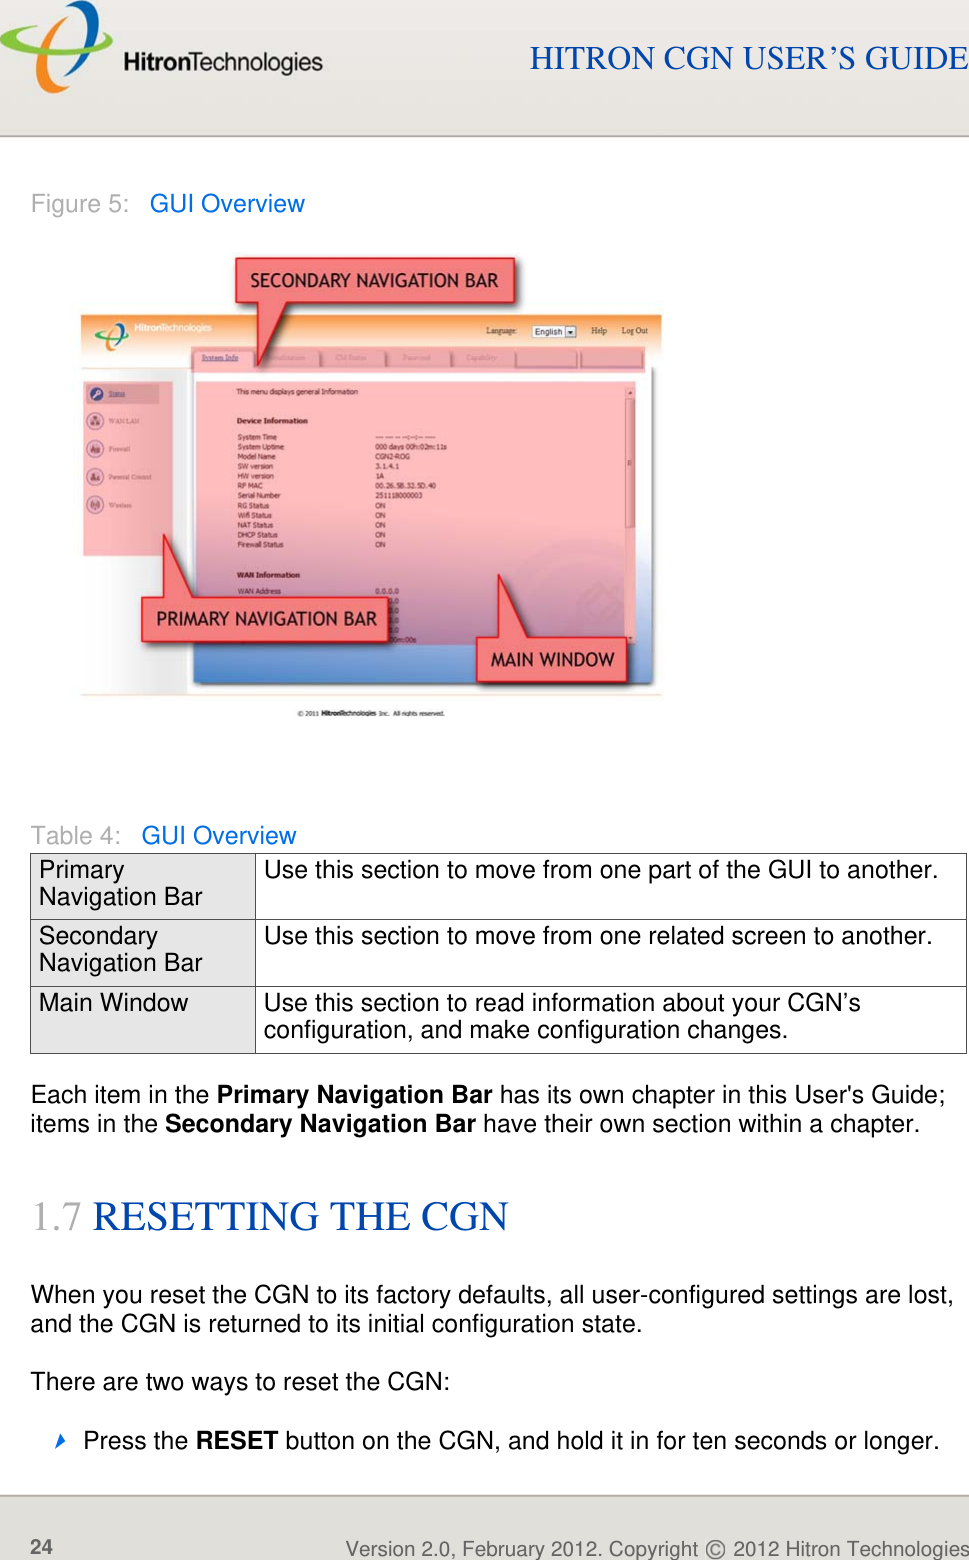 INTRODUCTIONVersion 2.0, February 2012. Copyright   2012 Hitron Technologies24Version 2.0, February 2012. Copyright   2012 Hitron Technologies24HITRON CGN USER’S GUIDEFigure 5:   GUI OverviewEach item in the Primary Navigation Bar has its own chapter in this User&apos;s Guide; items in the Secondary Navigation Bar have their own section within a chapter.1.7 RESETTING THE CGNWhen you reset the CGN to its factory defaults, all user-configured settings are lost, and the CGN is returned to its initial configuration state.There are two ways to reset the CGN:Press the RESET button on the CGN, and hold it in for ten seconds or longer.Table 4:   GUI OverviewPrimary Navigation BarUse this section to move from one part of the GUI to another.Secondary Navigation BarUse this section to move from one related screen to another.Main Window Use this section to read information about your CGN’s configuration, and make configuration changes.